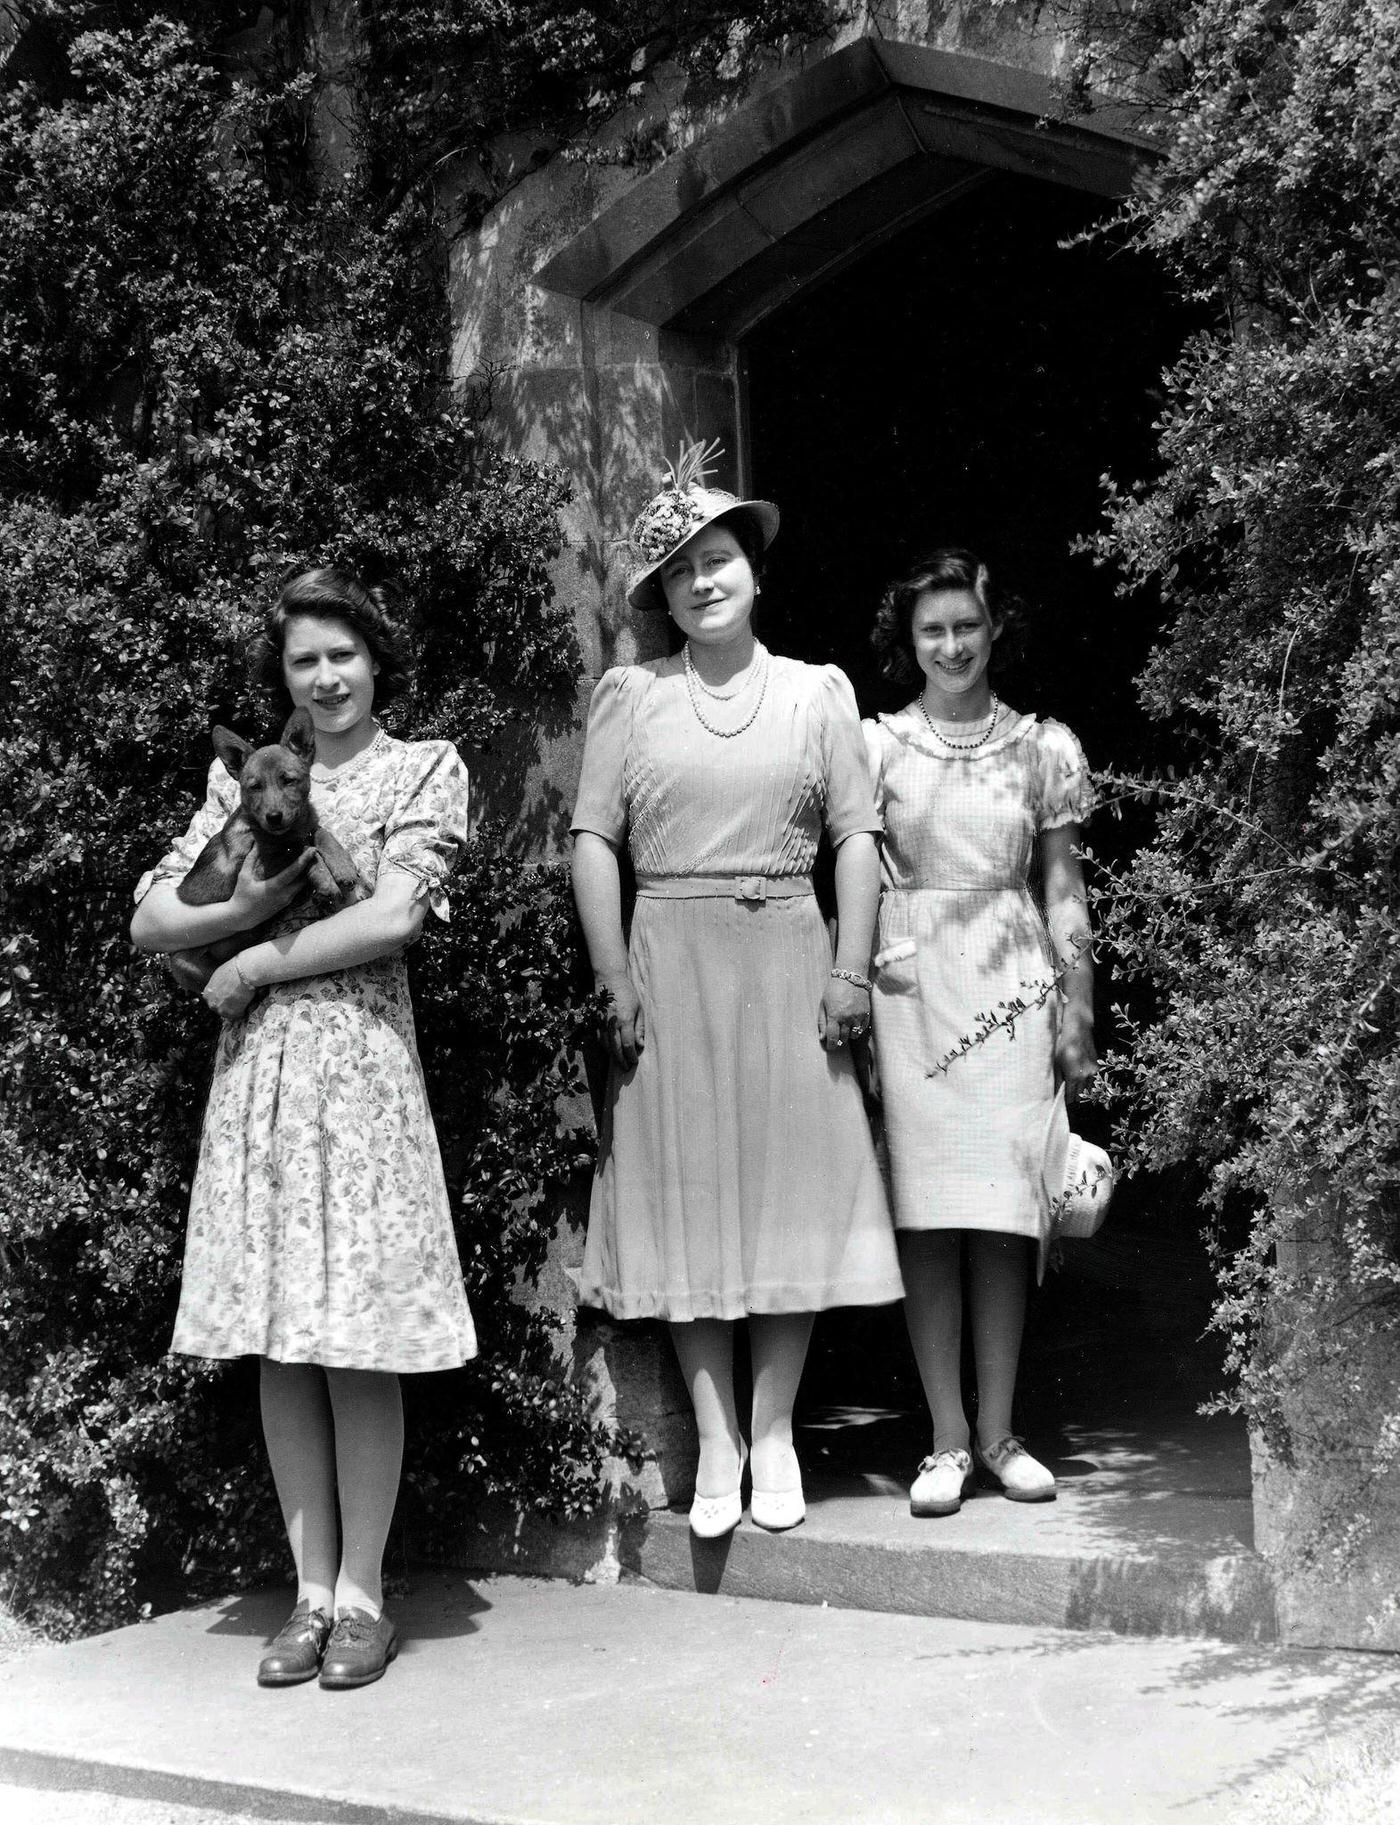 Queen Elizabeth The Queen Mother with her two daughters, Princess Margaret (right) and Princess Elizabeth (later Queen Elizabeth II), holding a dog, during World War Two, 1940.